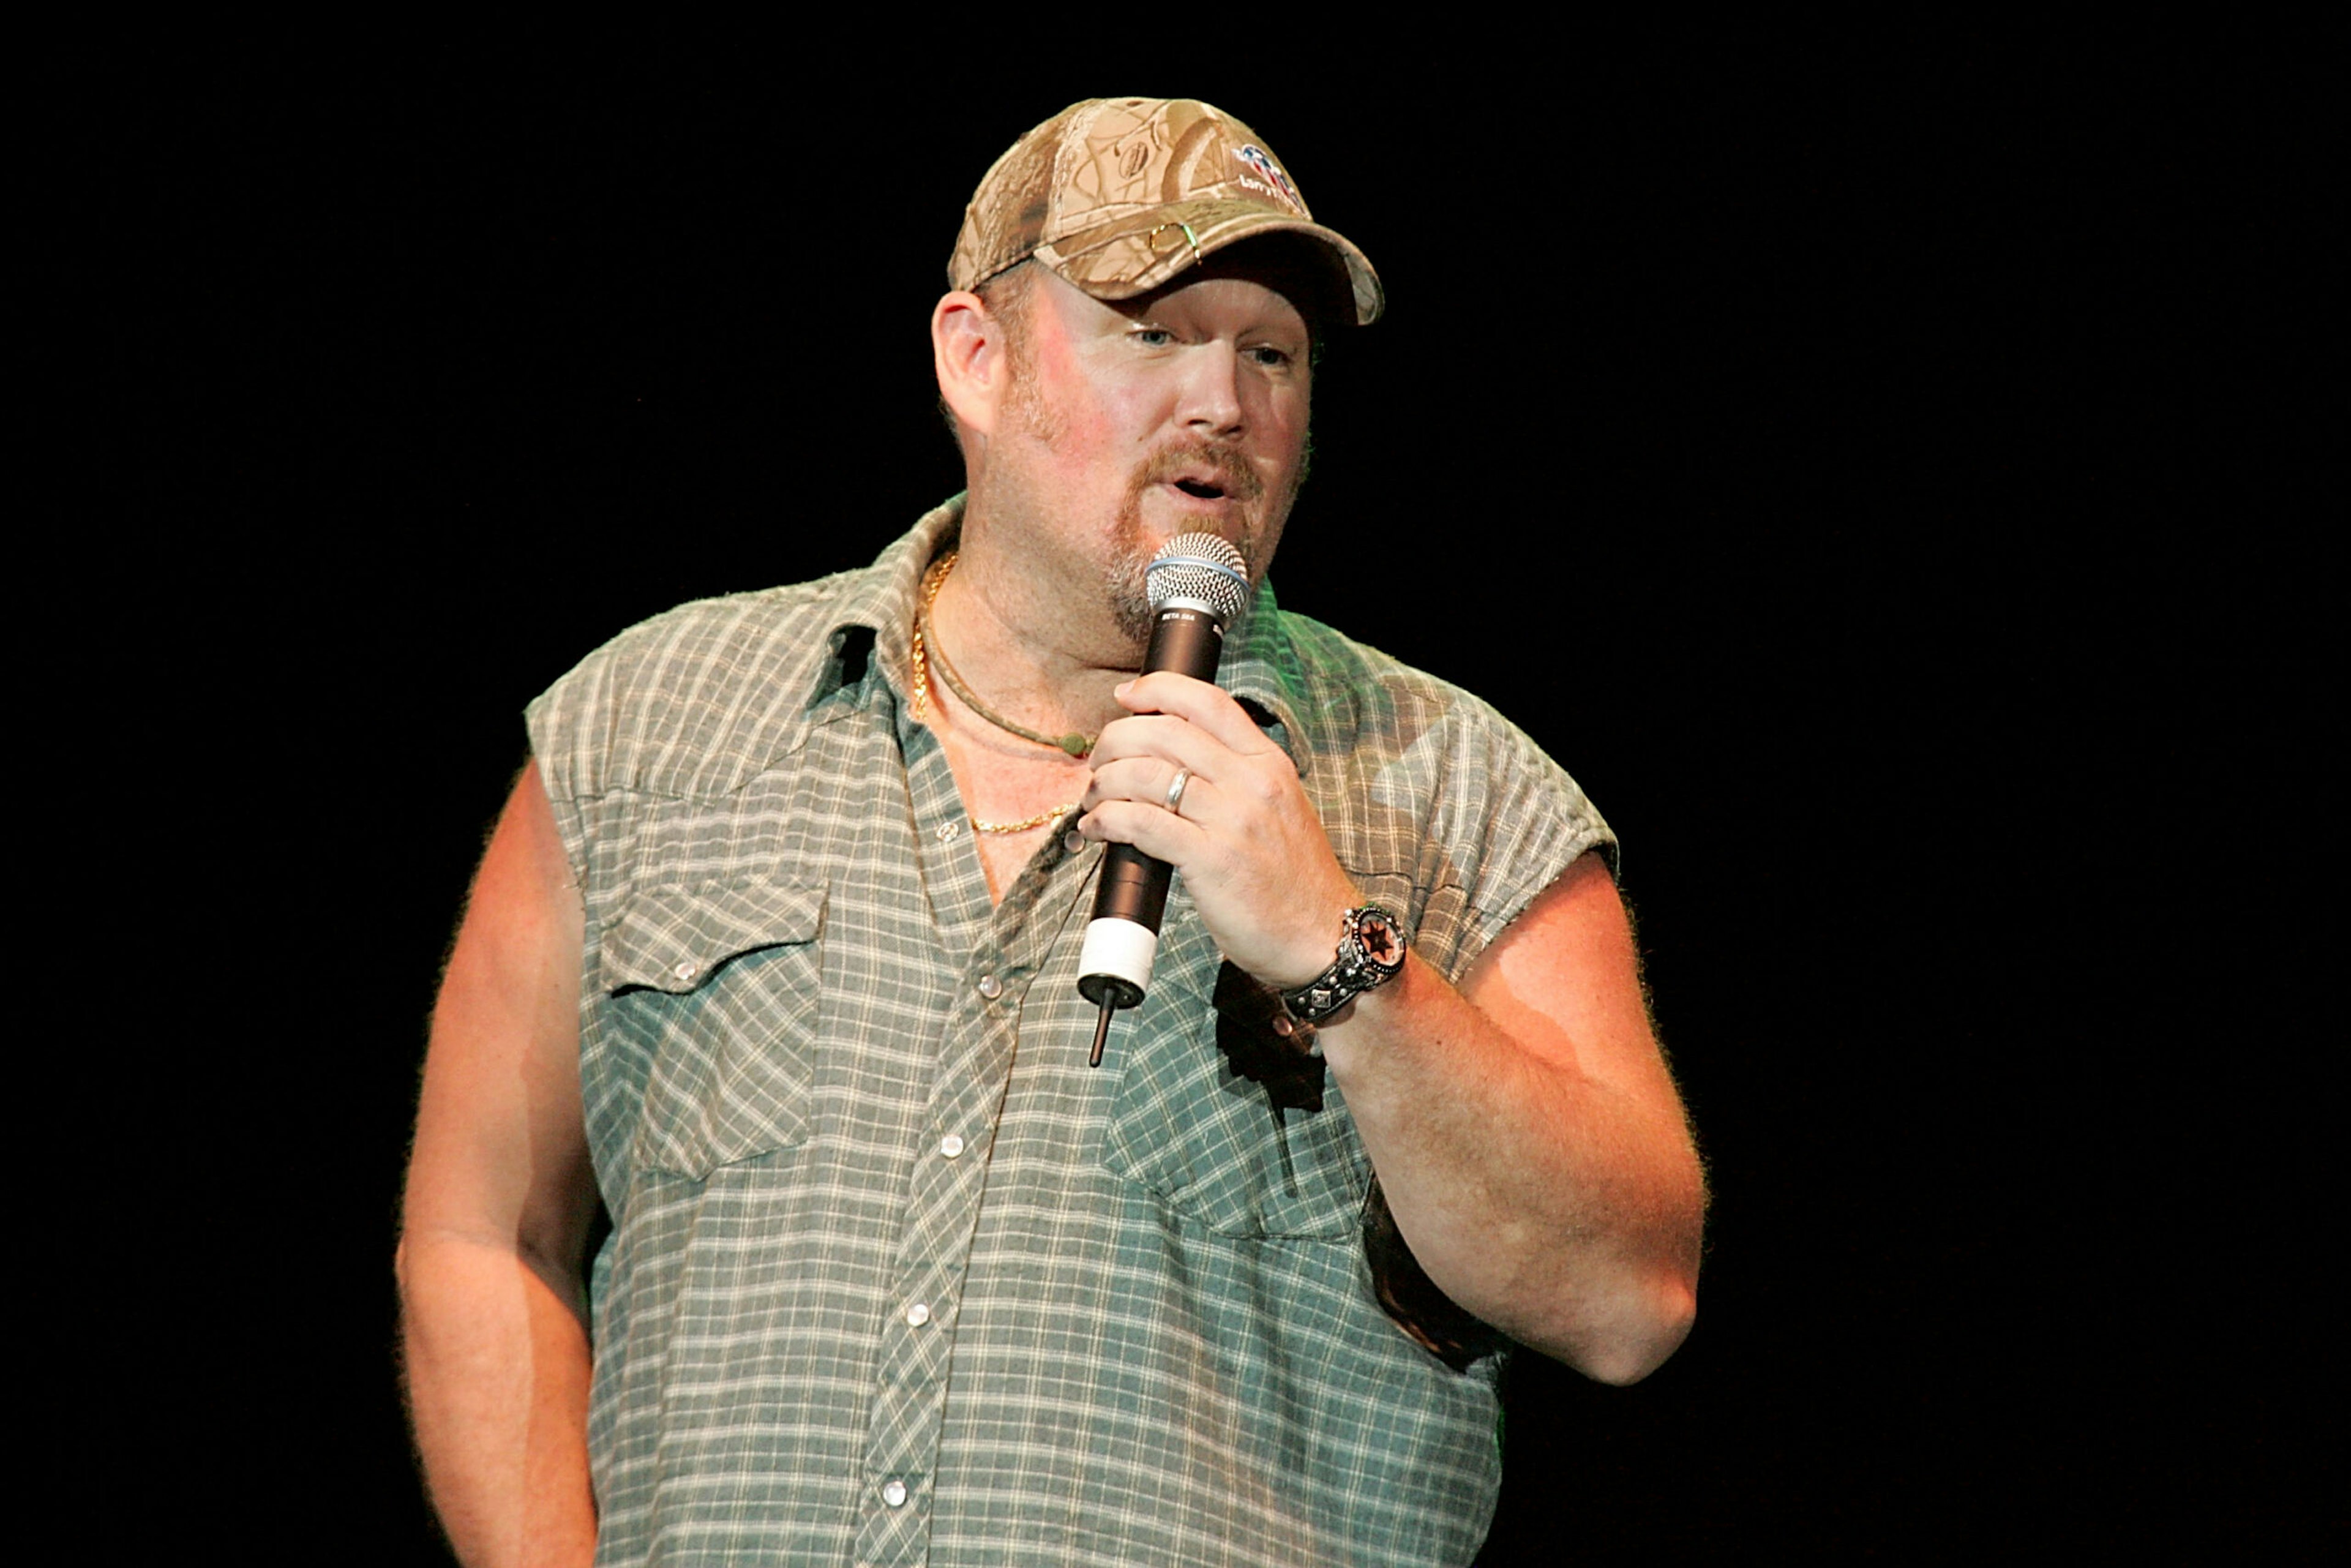 AUSTIN, TX - OCTOBER 30: Comedian Larry The Cable Guy performs at The Frank Erwin Center on October 30, 2009 in Austin, Texas. (Photo by Gary Miller/FilmMagic)